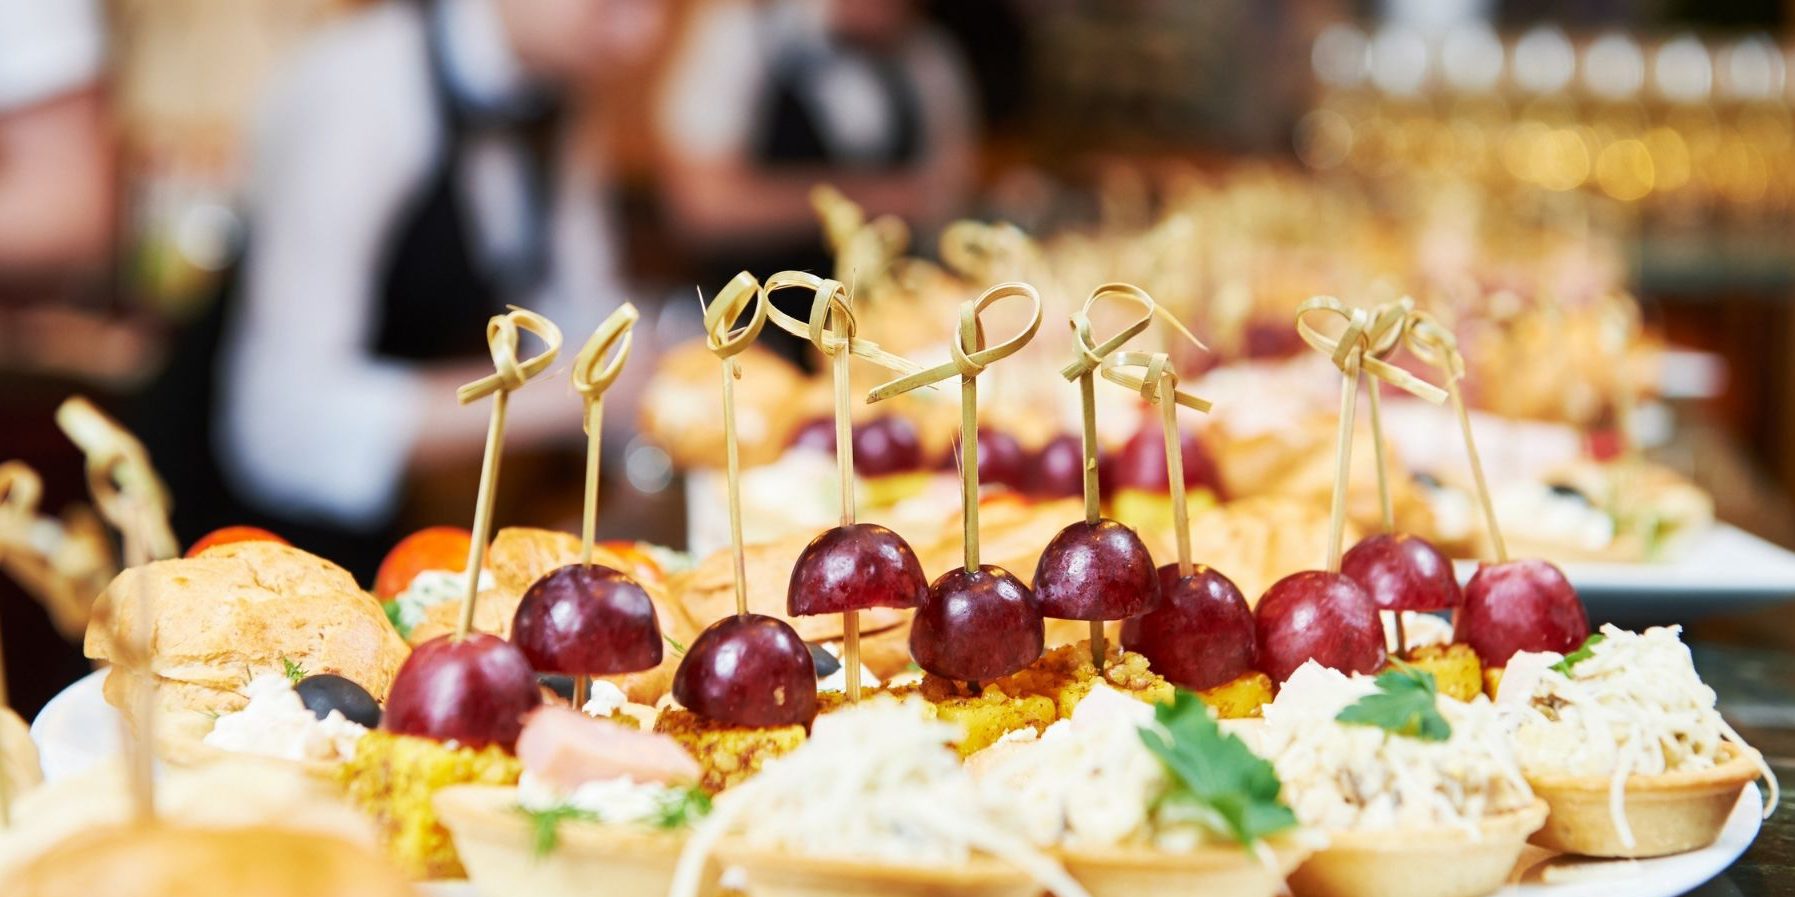 Global Catering Services And Food Contractors Market Outlook, Opportunities And Strategies